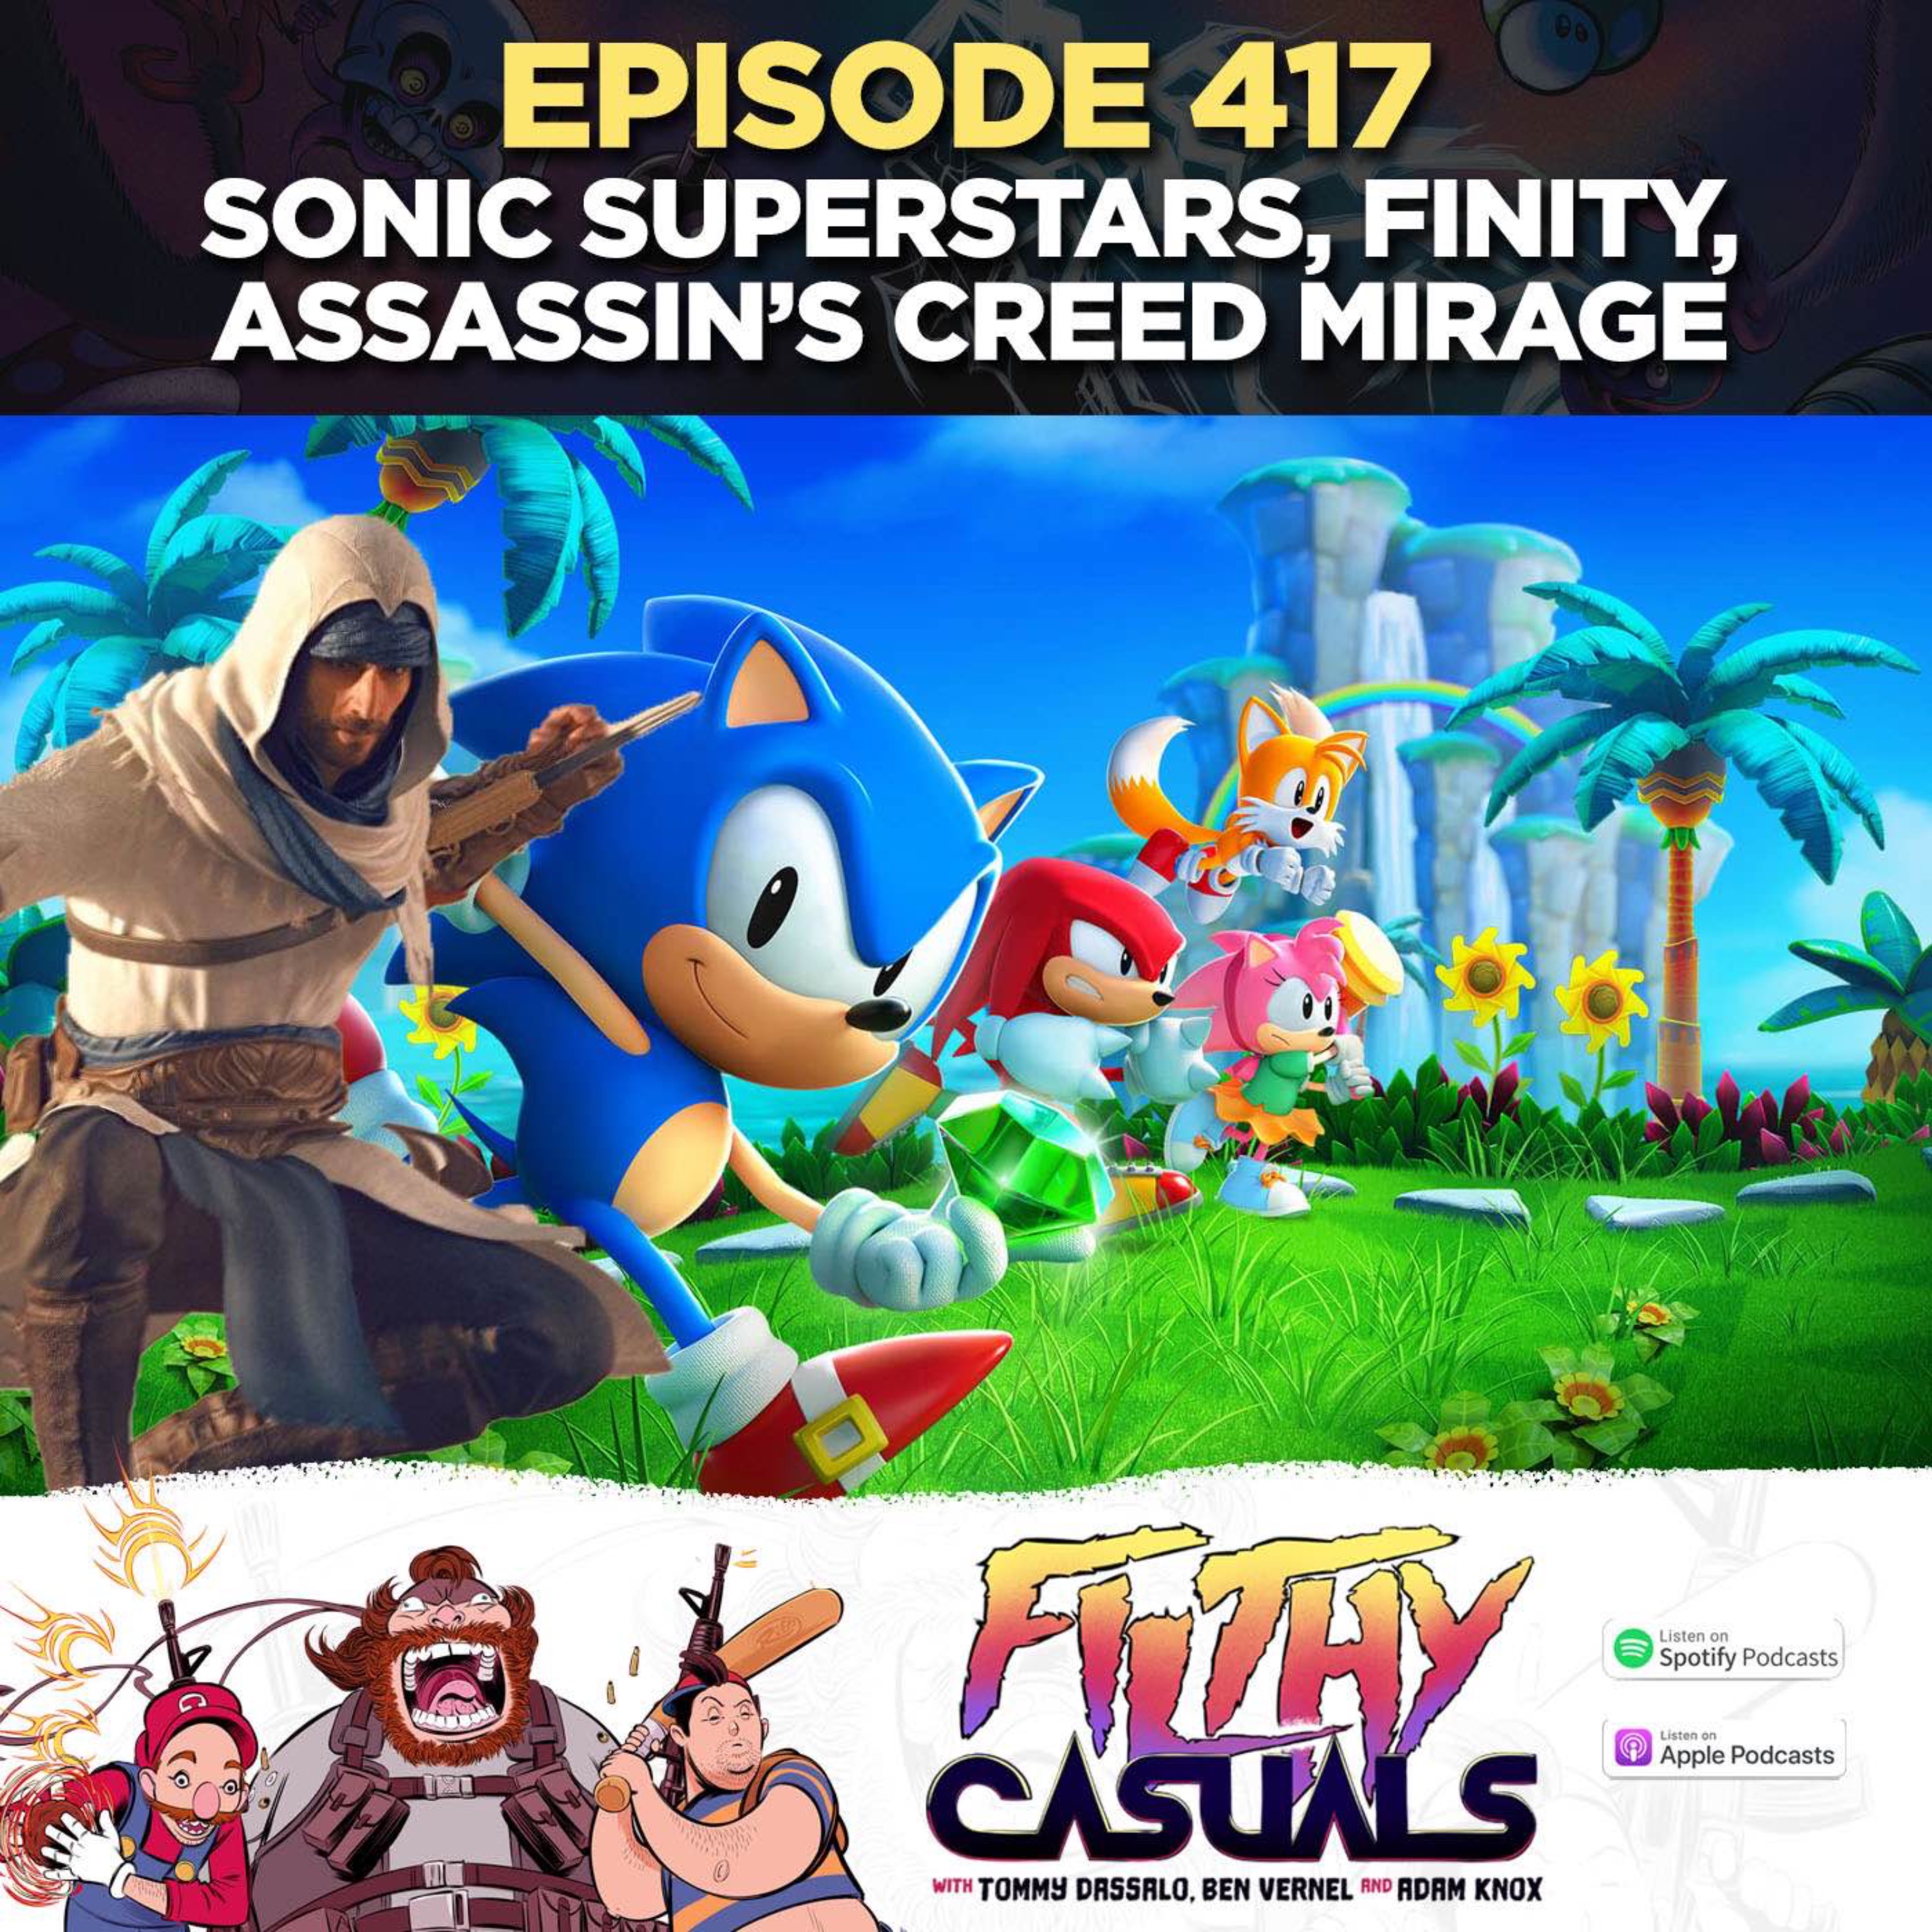 Episode 417: Sonic Superstars, Finity, Assassin's Creed Mirage